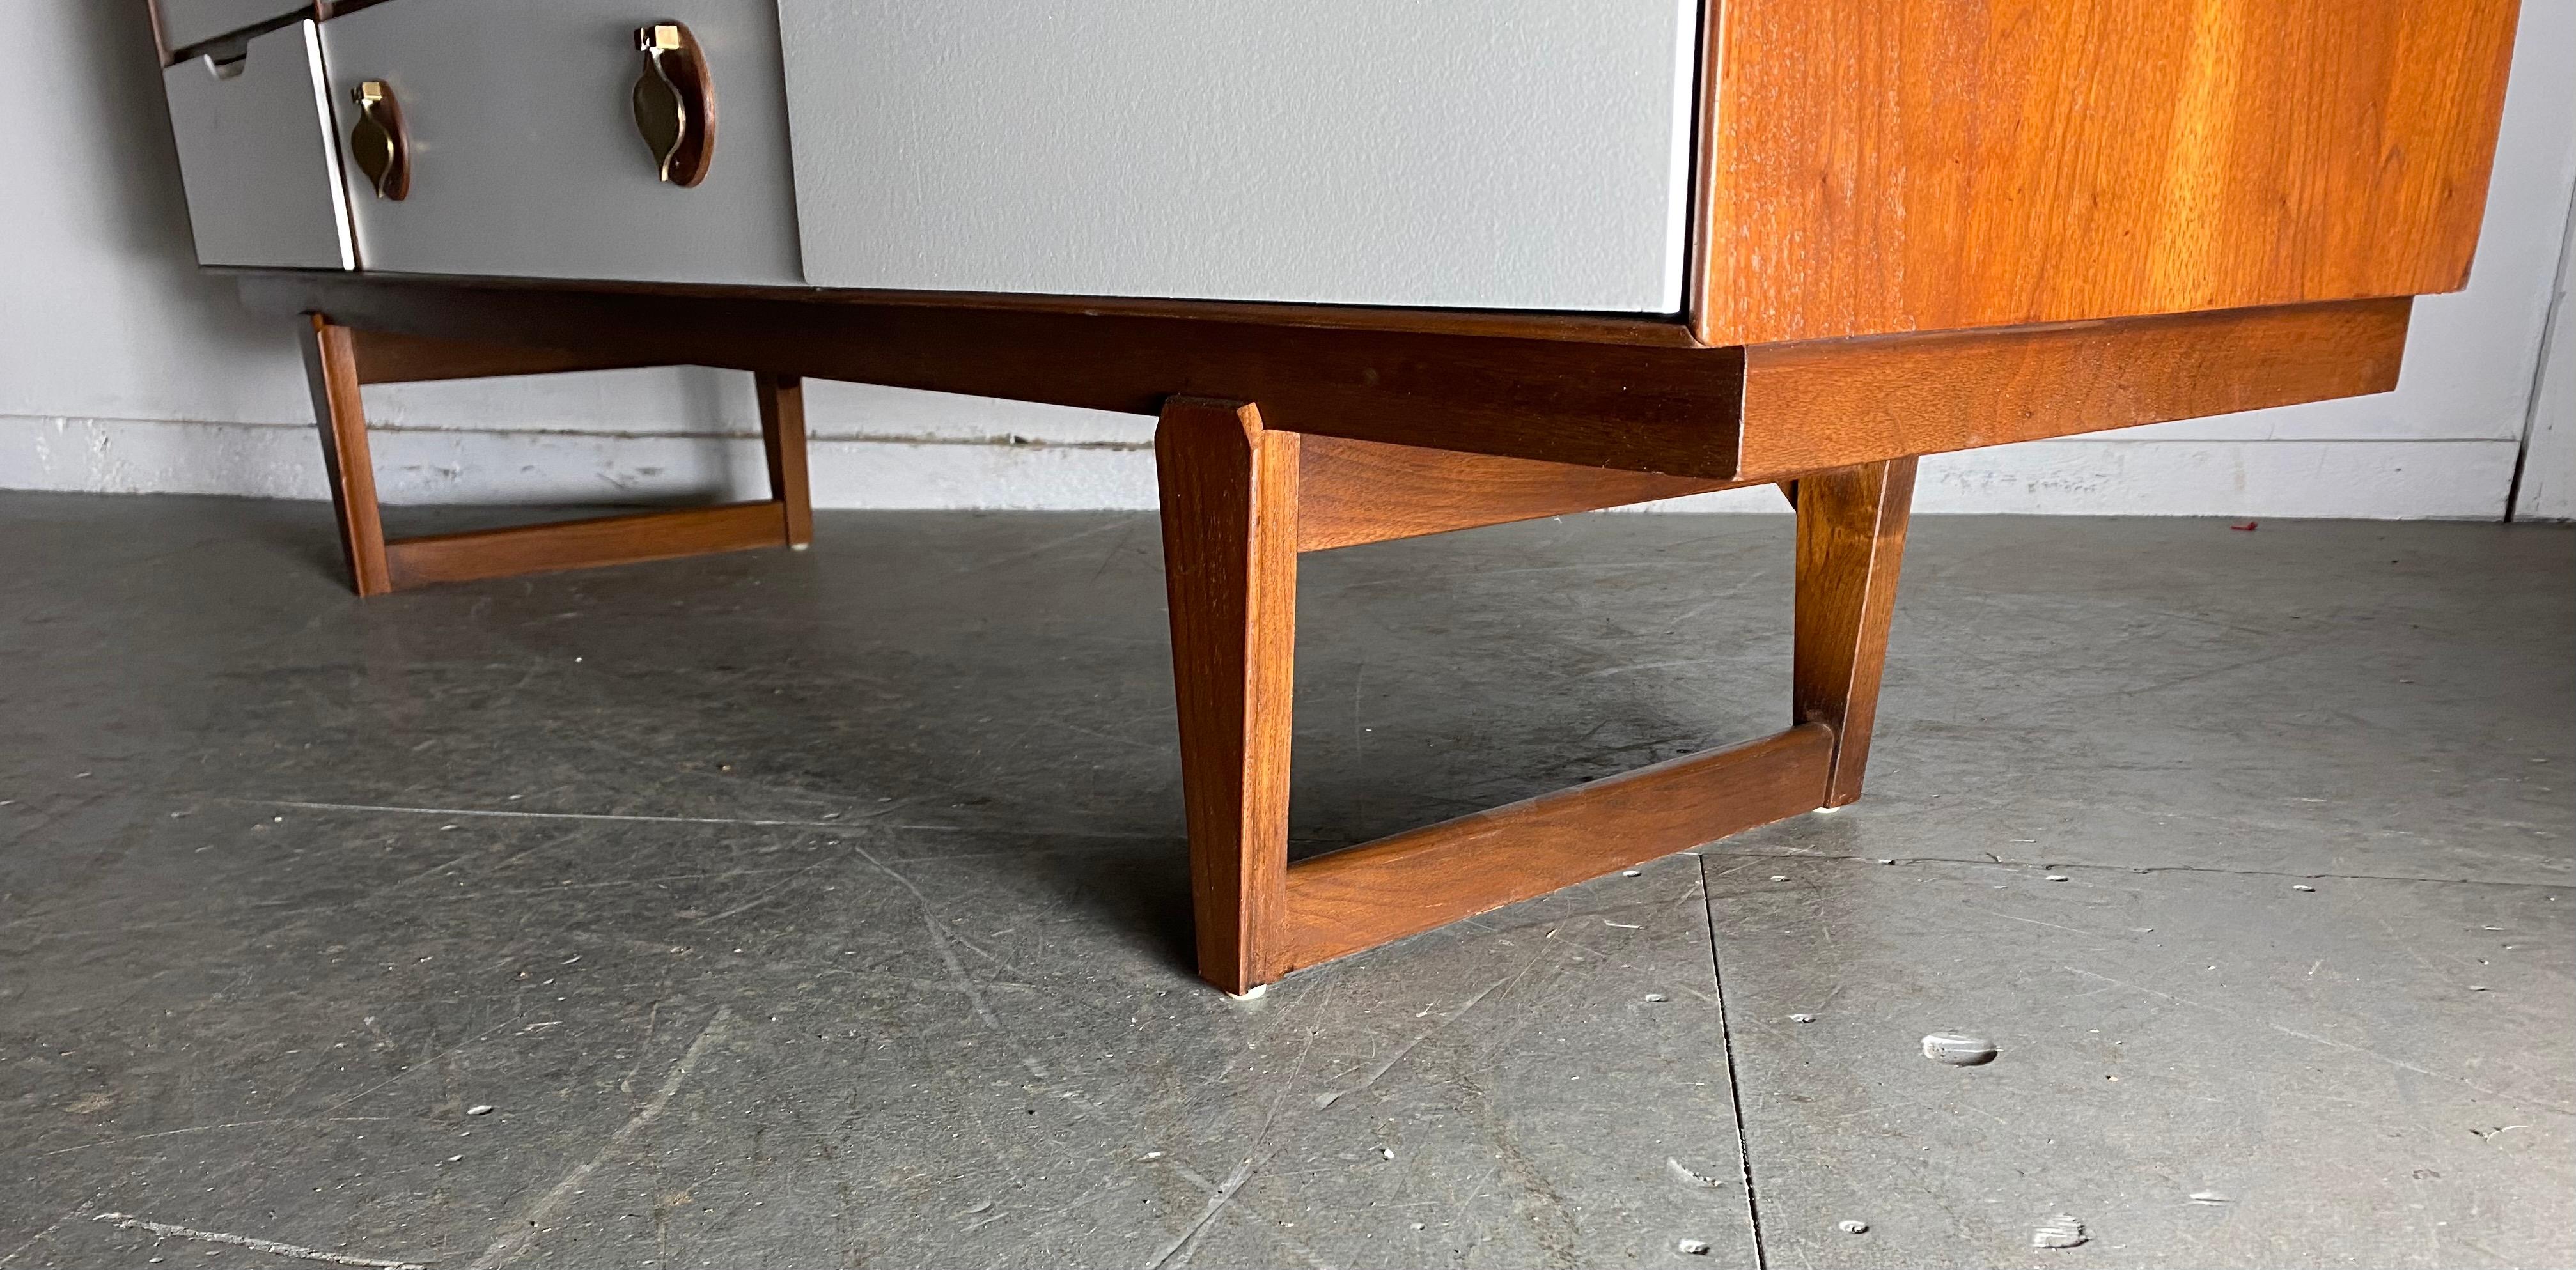 Elegant Mid-Century Modern furniture by Stanley featuring white front drawers accenting the deep figured walnut wood body. Spacious drawers with over-sized brass spade shaped hardware that add a whimsical style. Unusual sled leg design. Superior